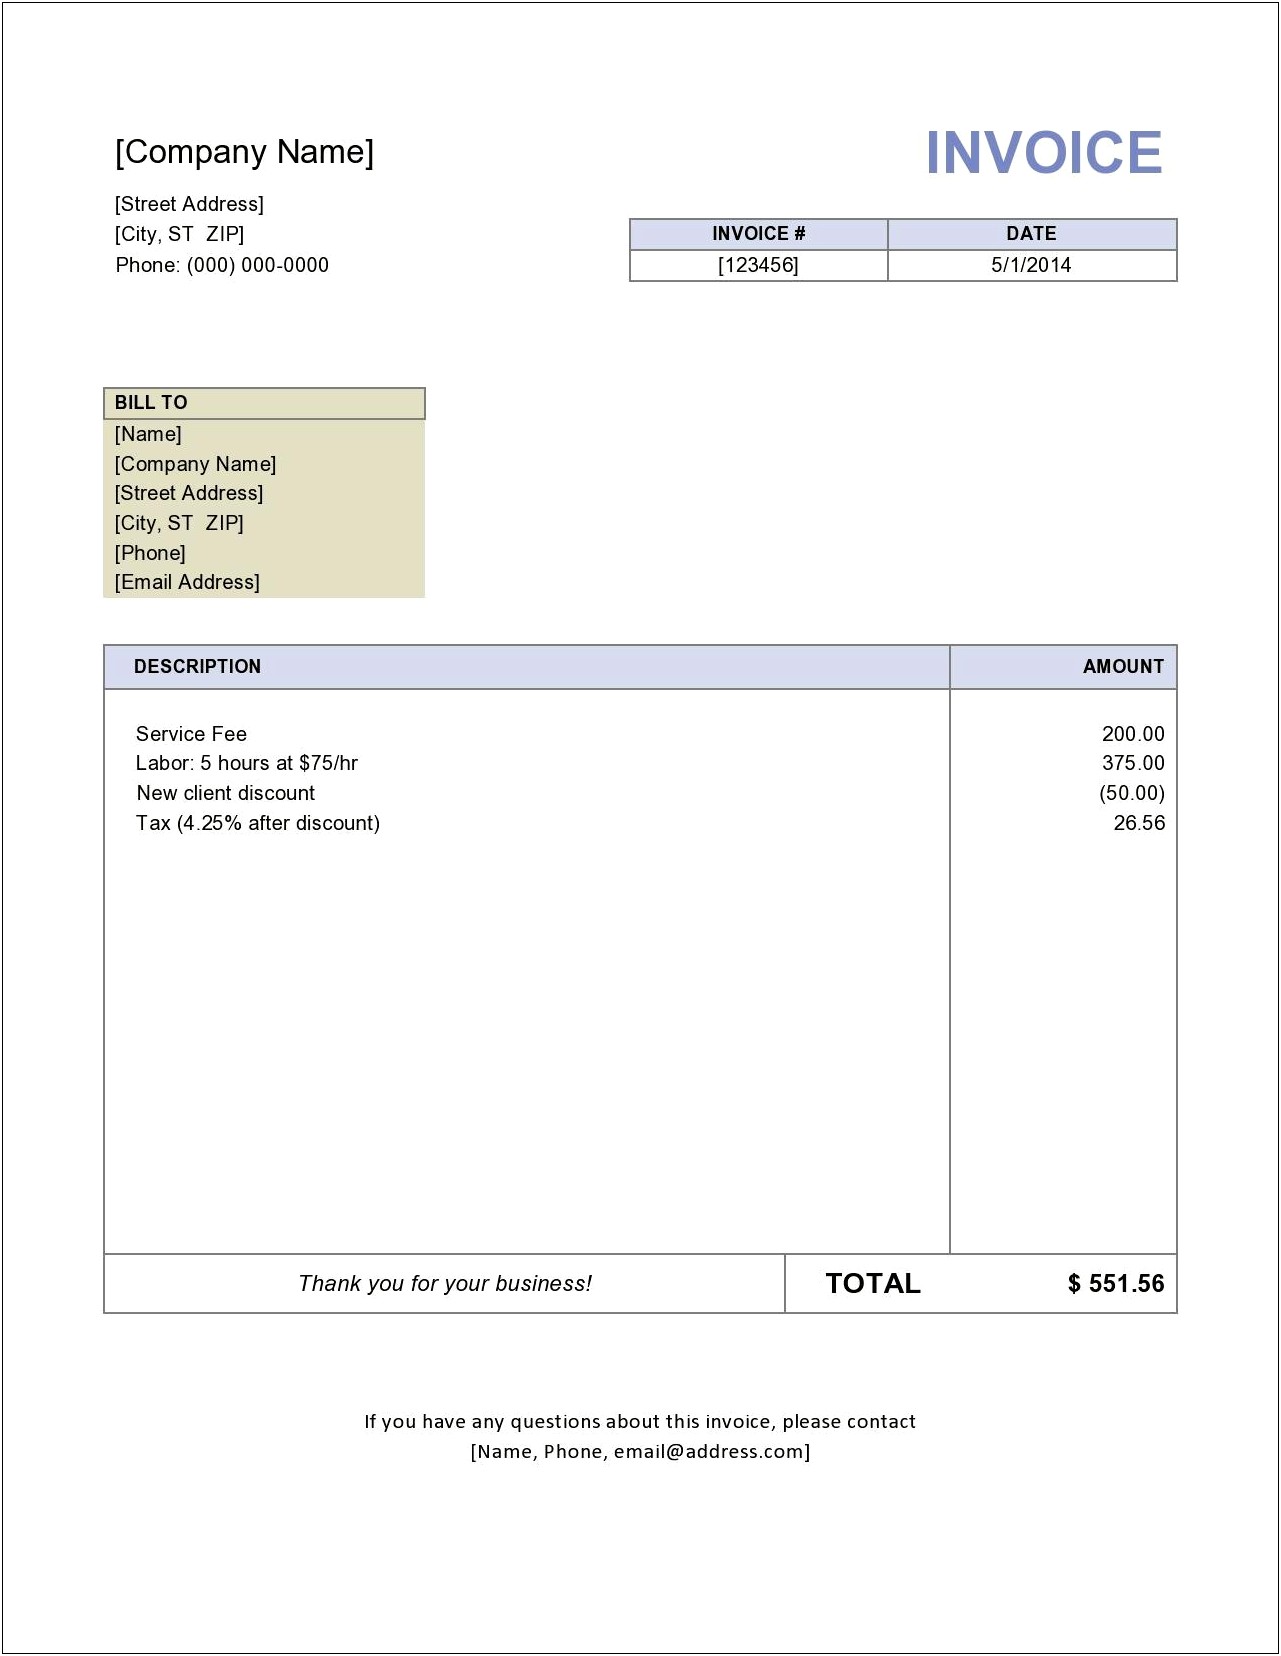 Microsoft Office Word Invoice Template Free